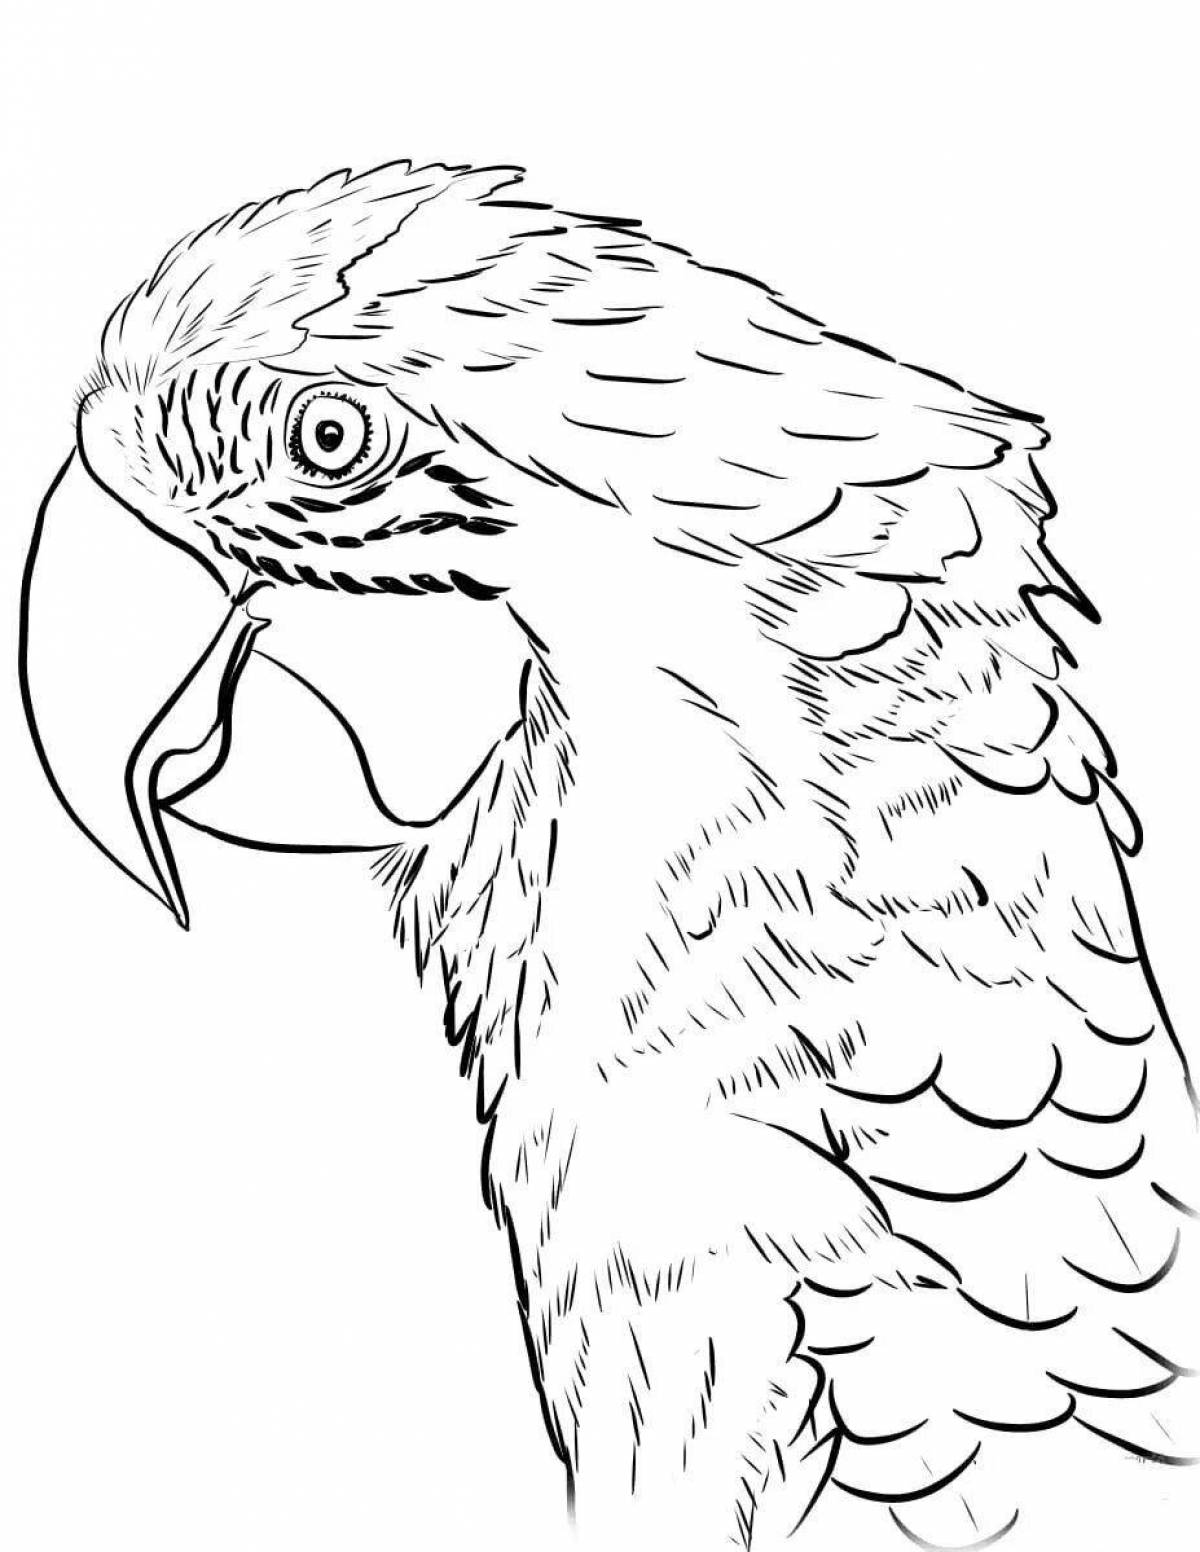 Coloring book funny macaw parrot for kids